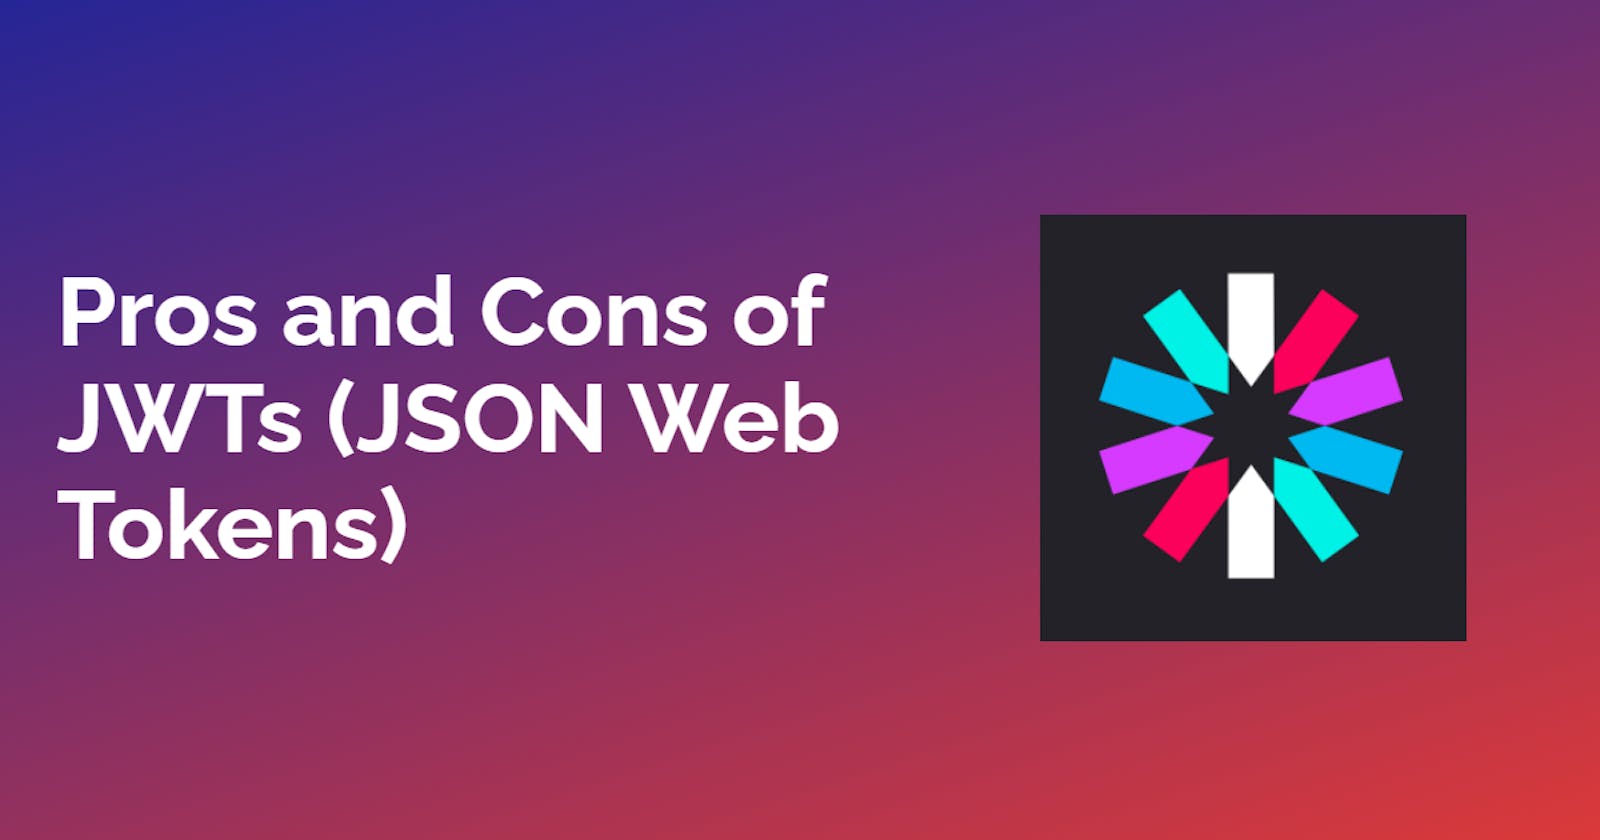 Pros and Cons of JWTs (JSON Web Tokens)